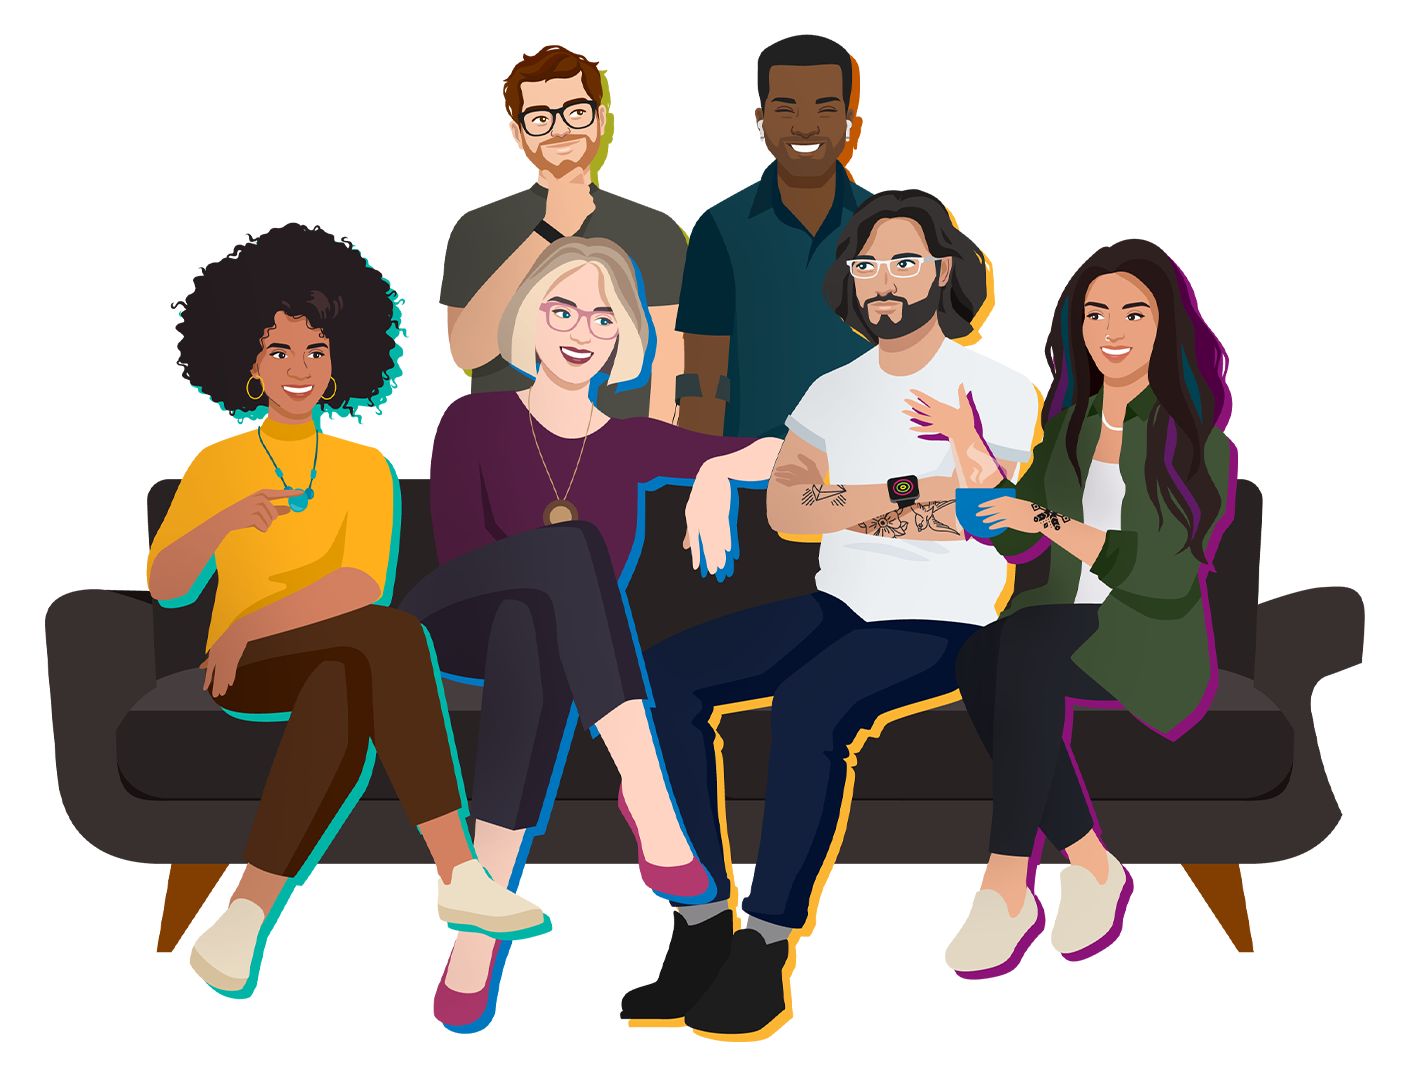 The binge-worthy PMQ series follows six diverse characters, all new people managers, who represent a range of ethnicities, gender identities, bodies, abilities, and personalities.